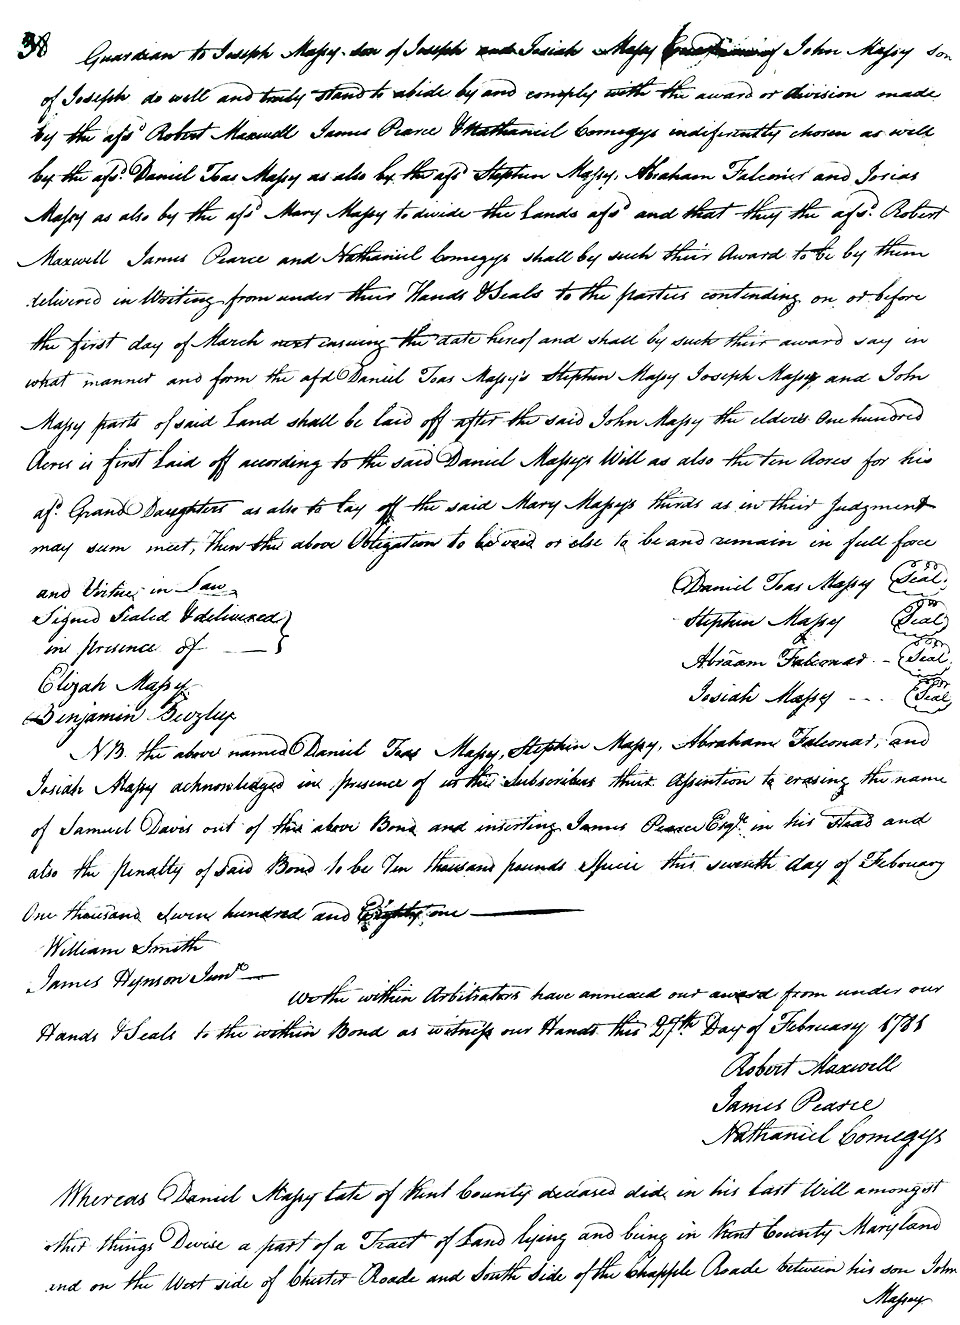 Maryland Land Records, Kent County, Daniel Toas Massey, et al. to Massy, March 19, 1781